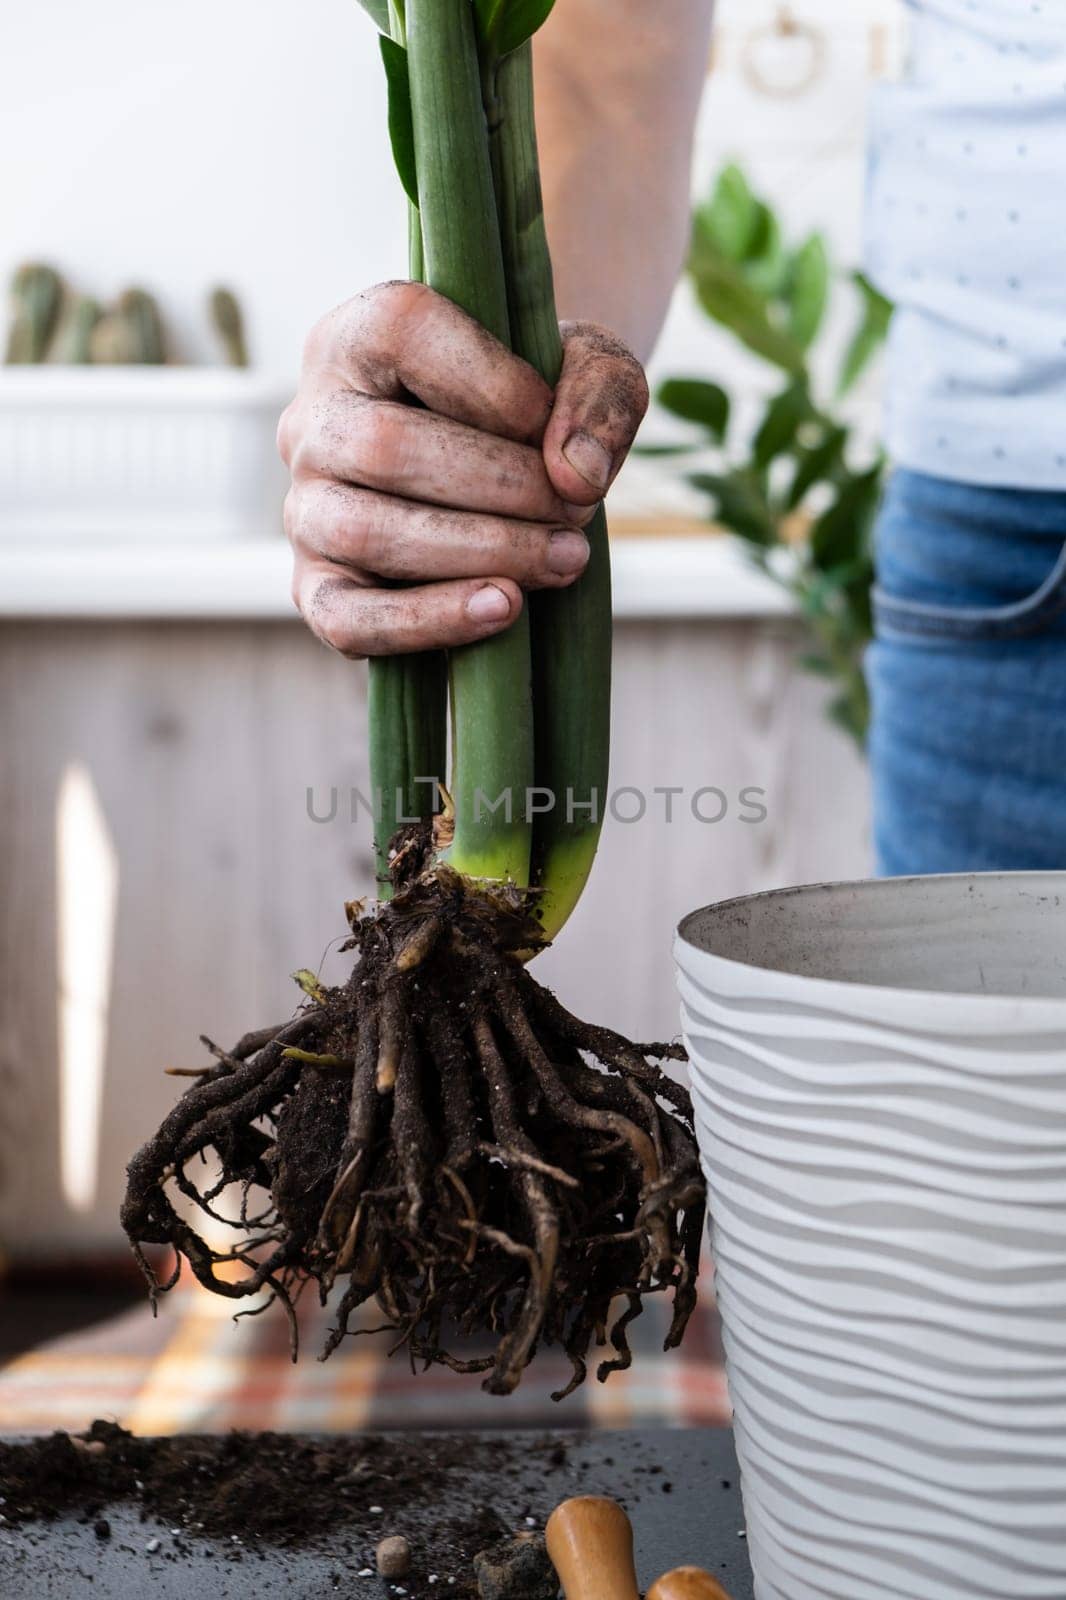 Man doing replant zamioculcas to new pot at home. Cleaning roots. Pulling plant with roots from pot, close-up. Florist gardening at home. Leisure free time hobby